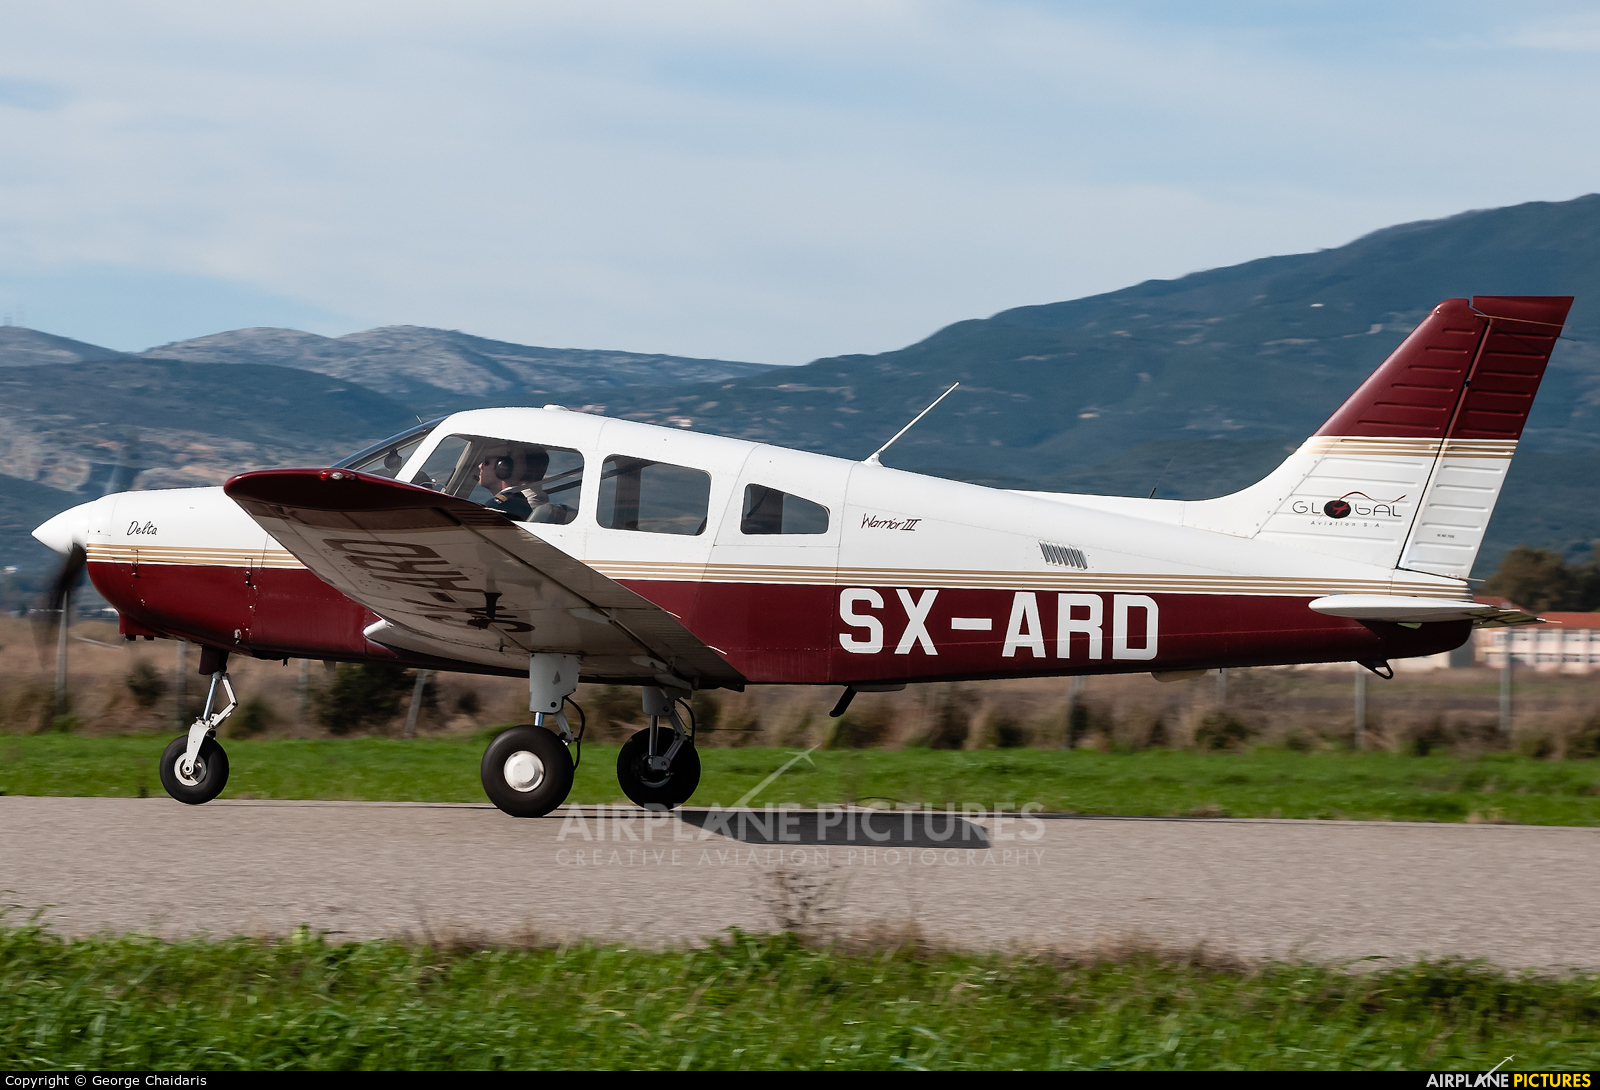 Global Aviation SX-ARD aircraft at Messolonghi Airfield